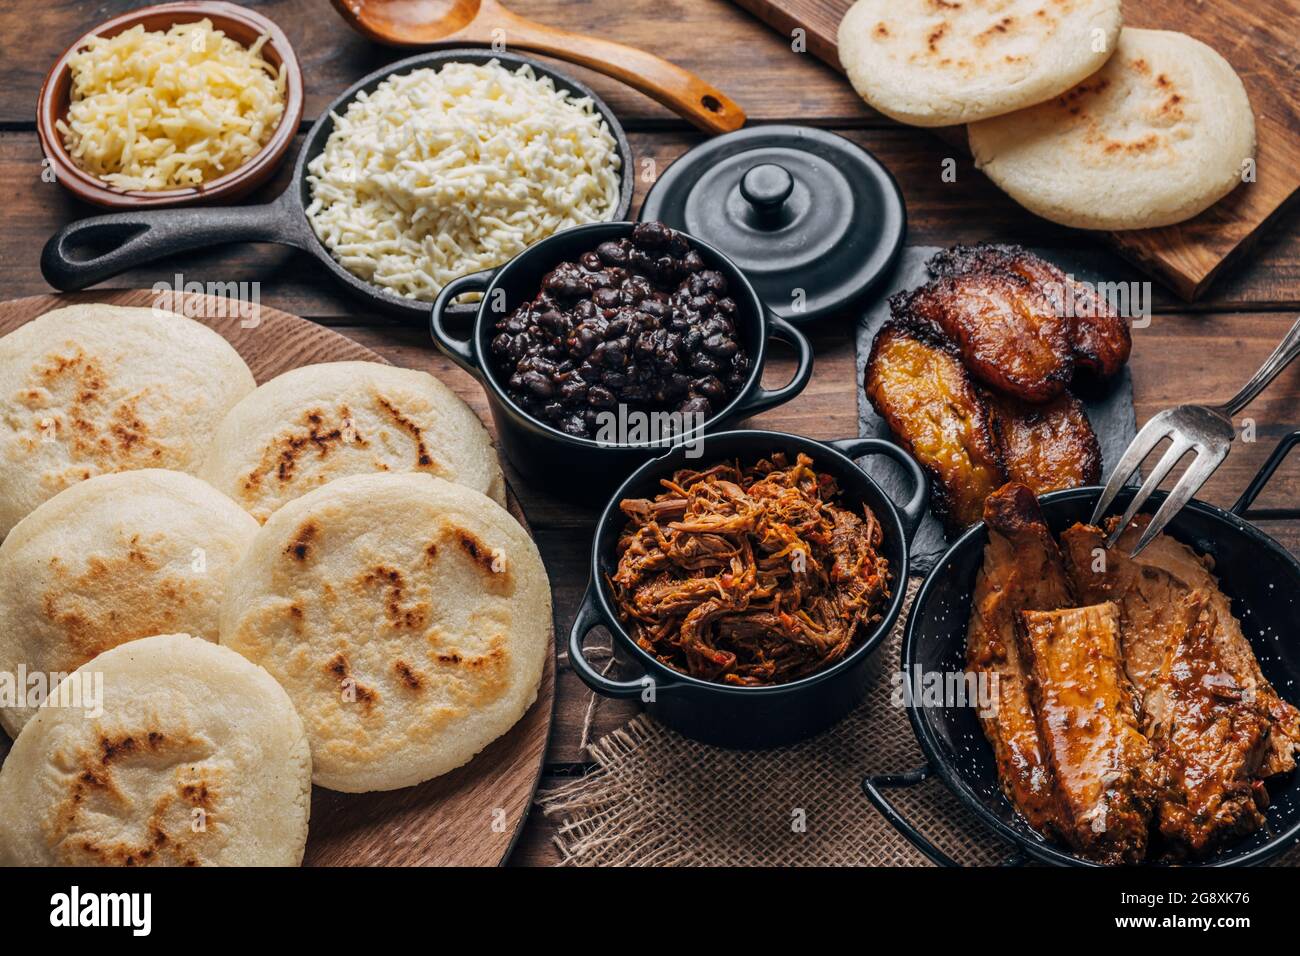 Table served with Venezuelan breakfast, arepas with different types of fillings such as black beans, shredded meat, fried plantain and cheese Stock Photo